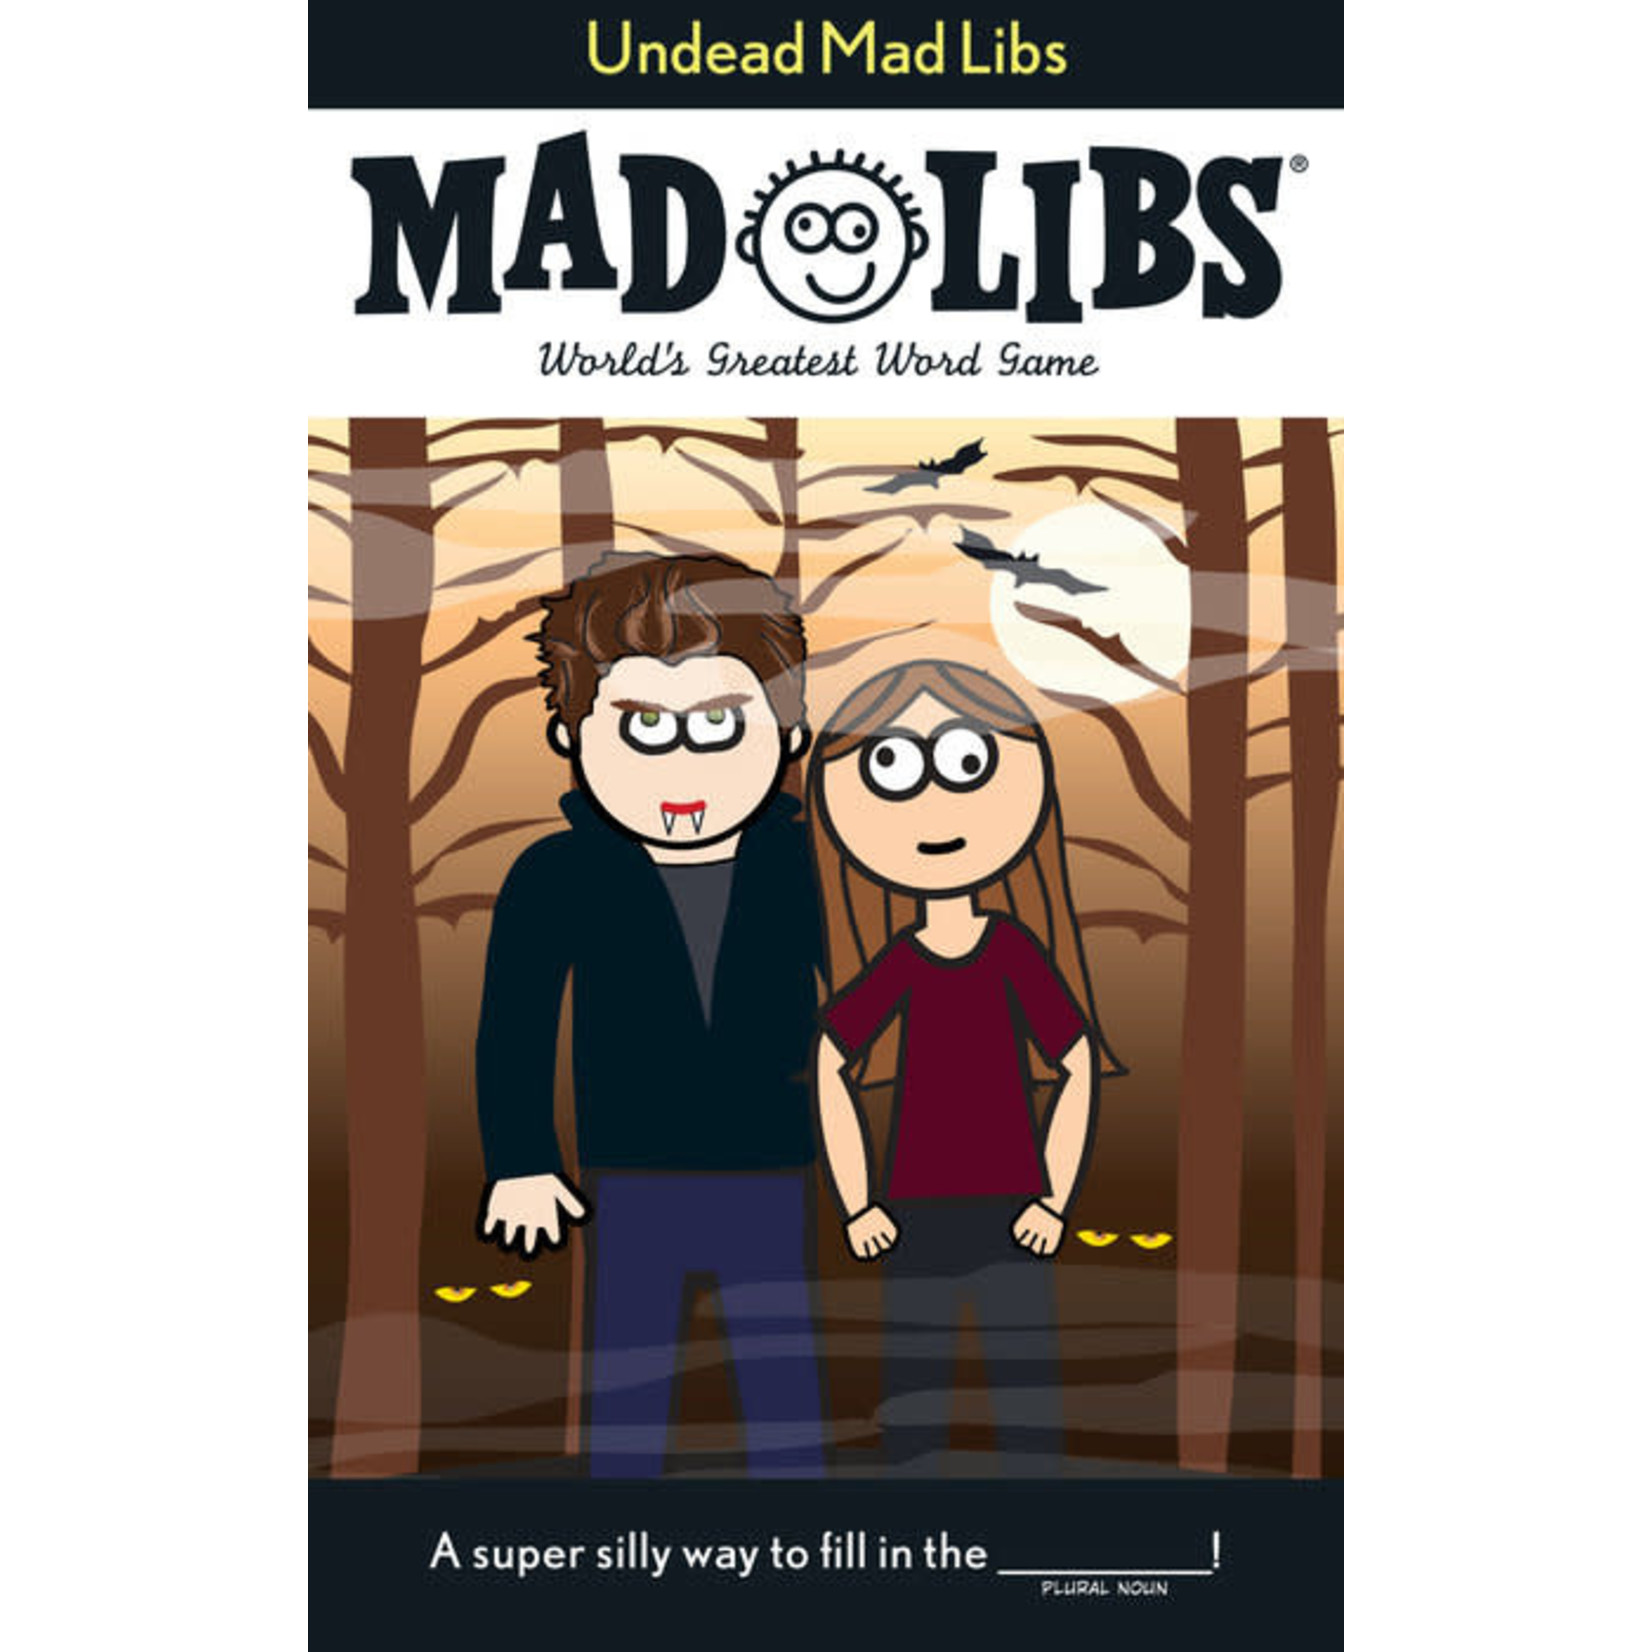 Mad Libs: Undead